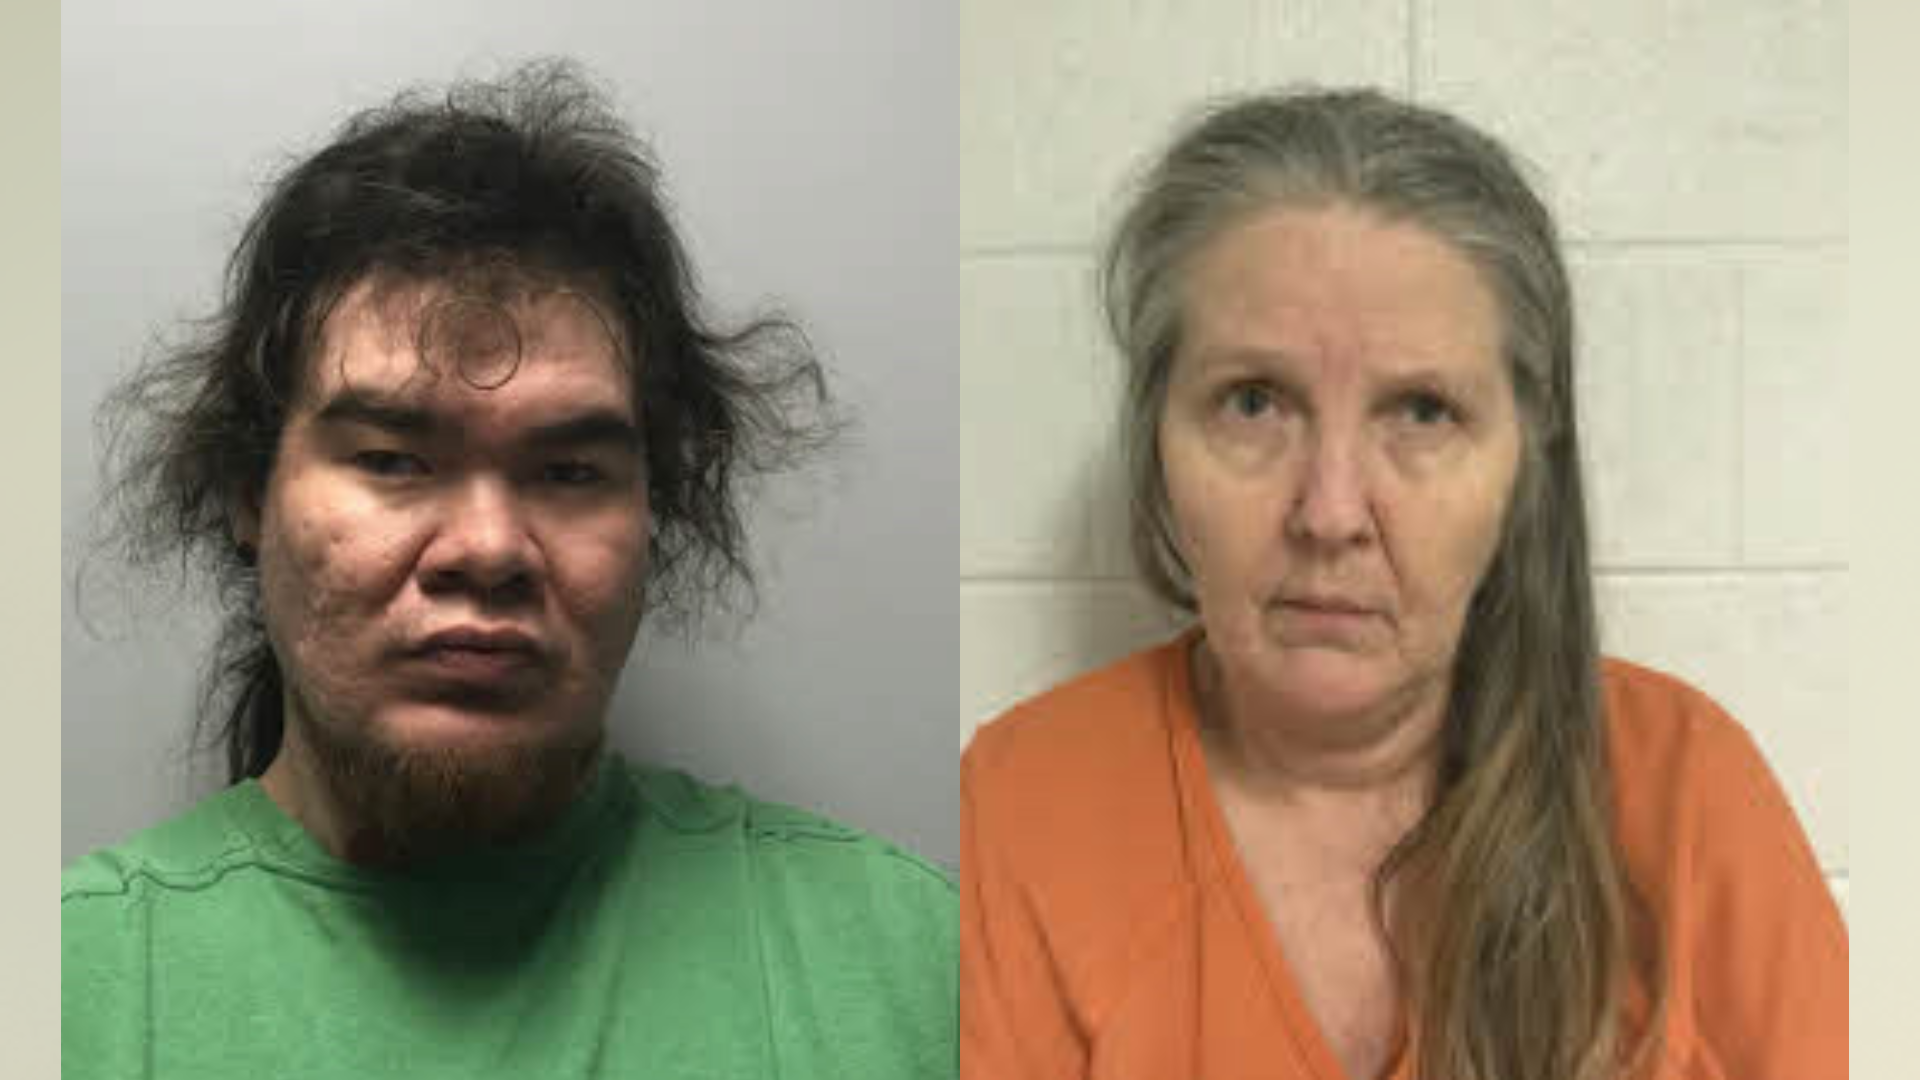 Deputies investigating death in Haywood County, suspects charged pic